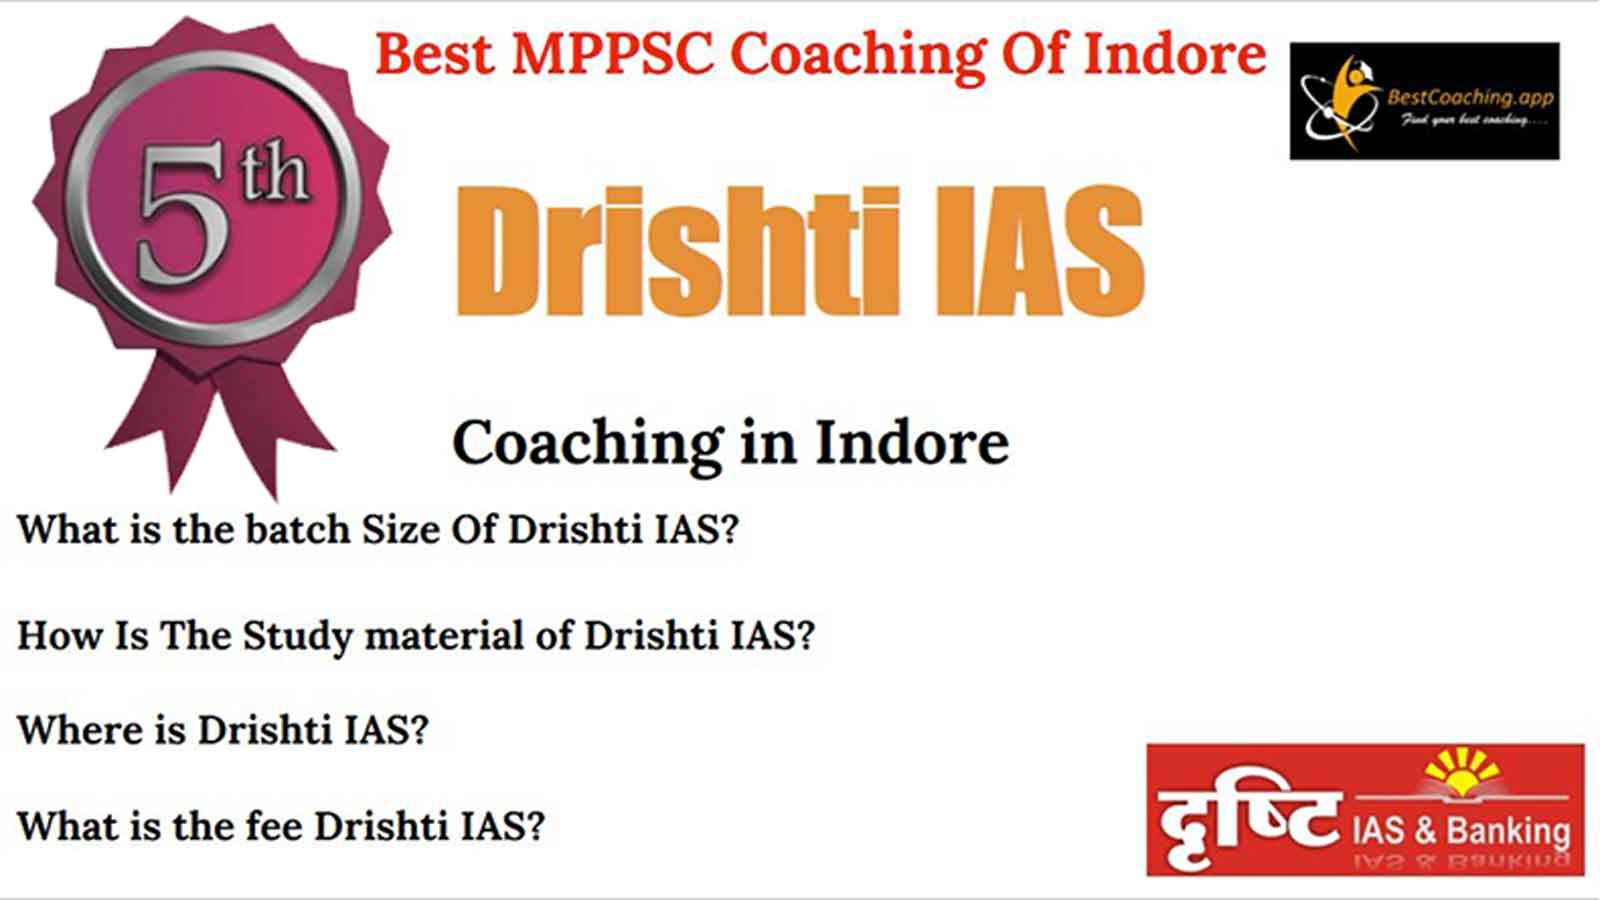 5th Top MPPSC Coaching in Indore 2022